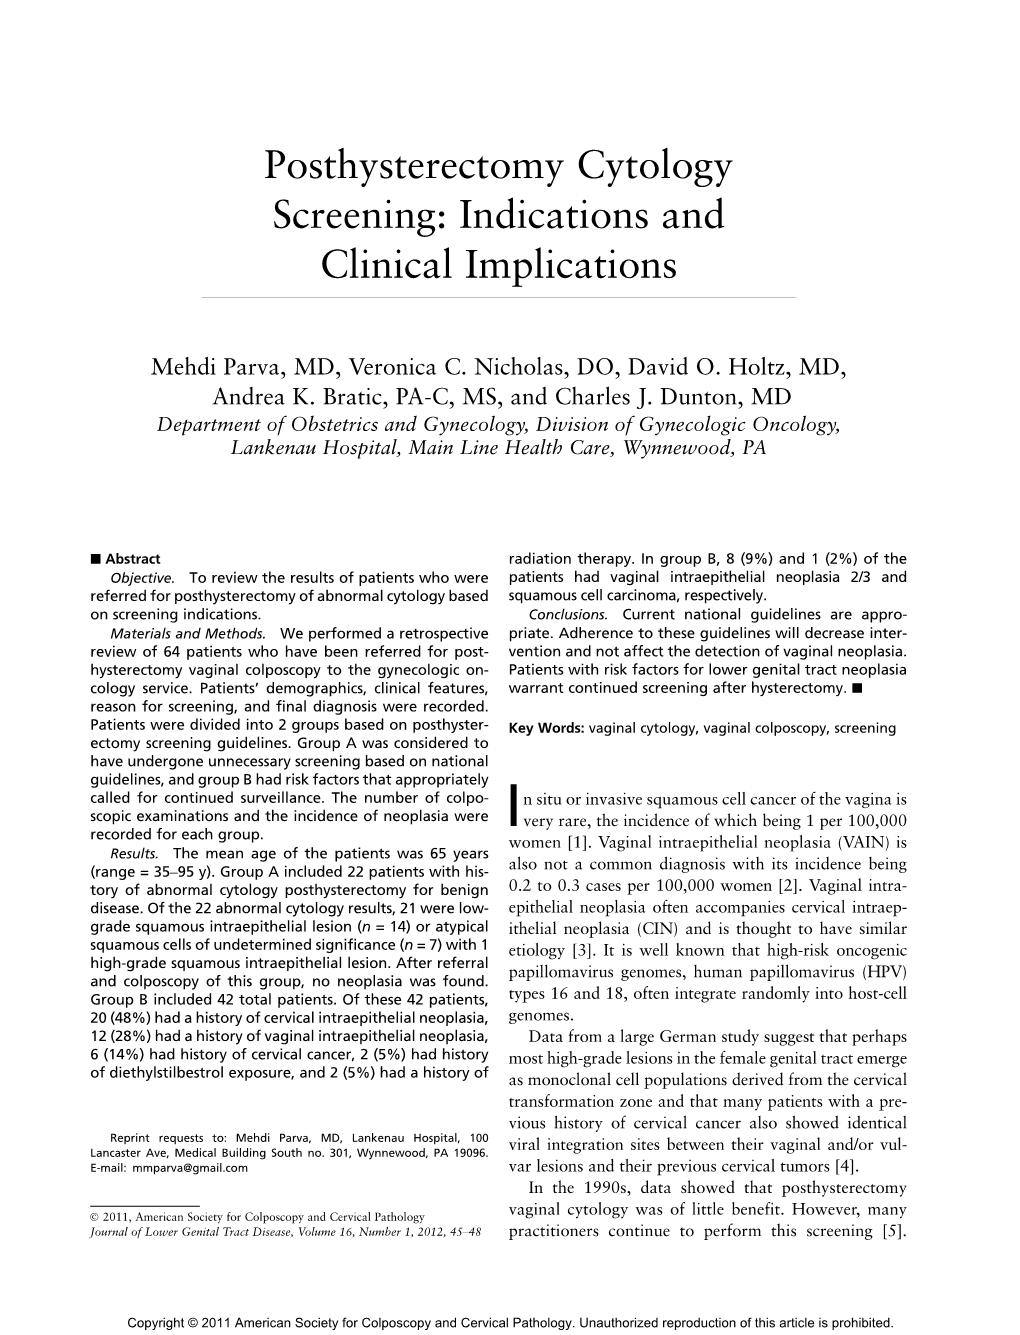 Posthysterectomy Cytology Screening: Indications and Clinical Implications